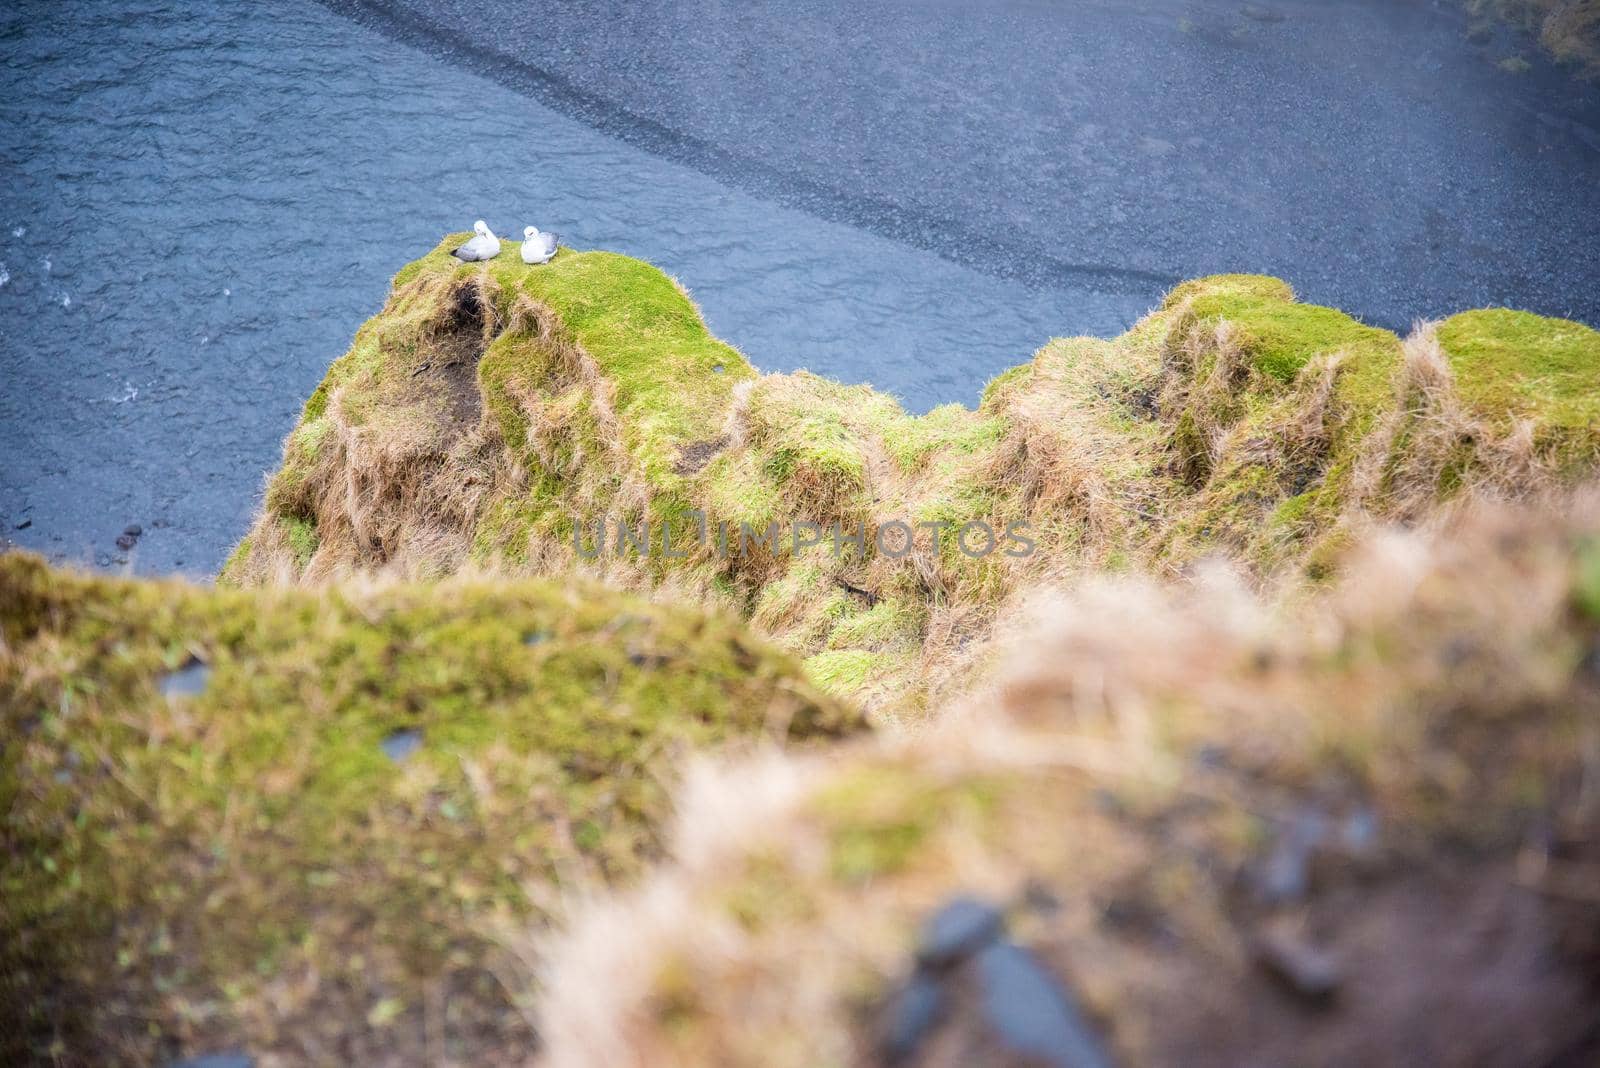 Mossy canyon in Iceland with two doves sitting together love birds with river below them. by jyurinko